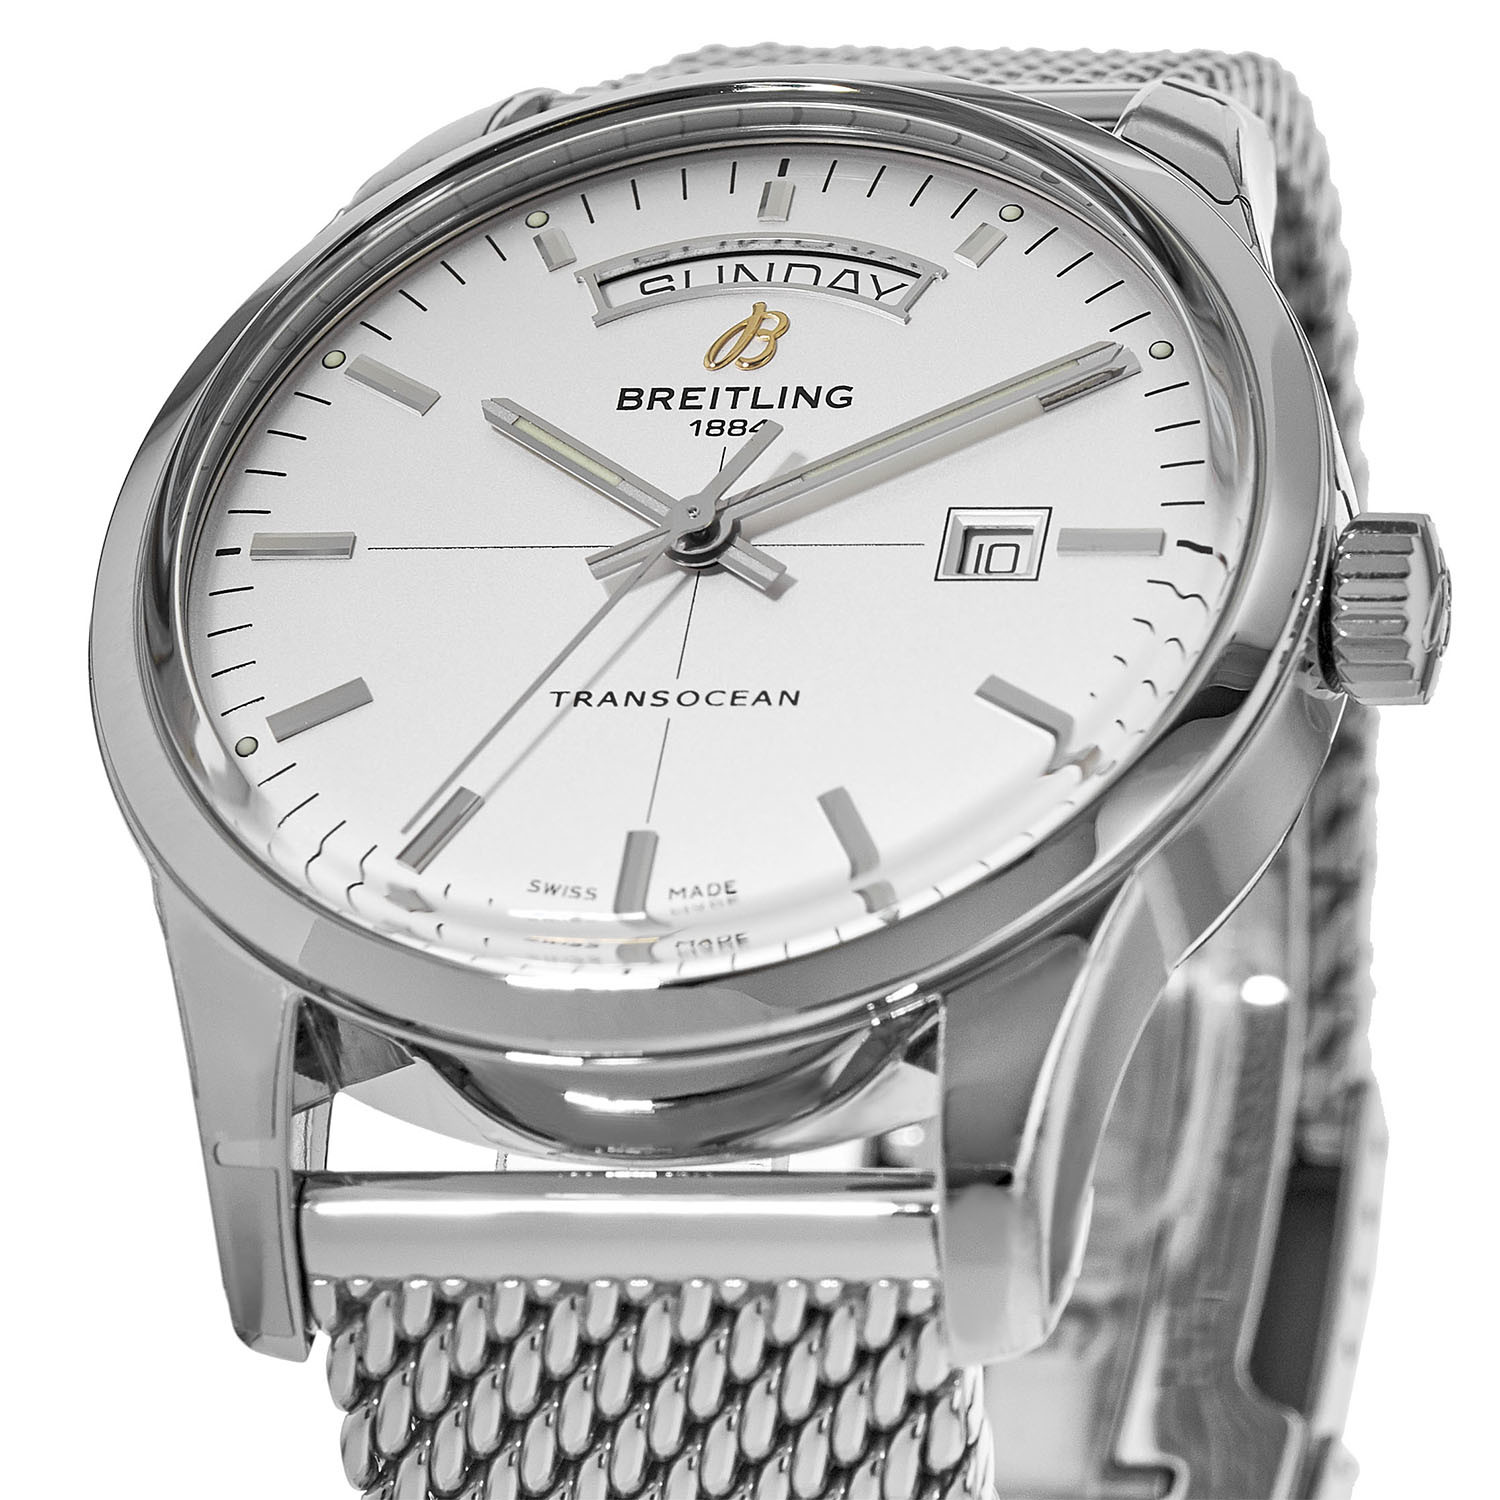 The 43mm replica watch has a silvery dial.